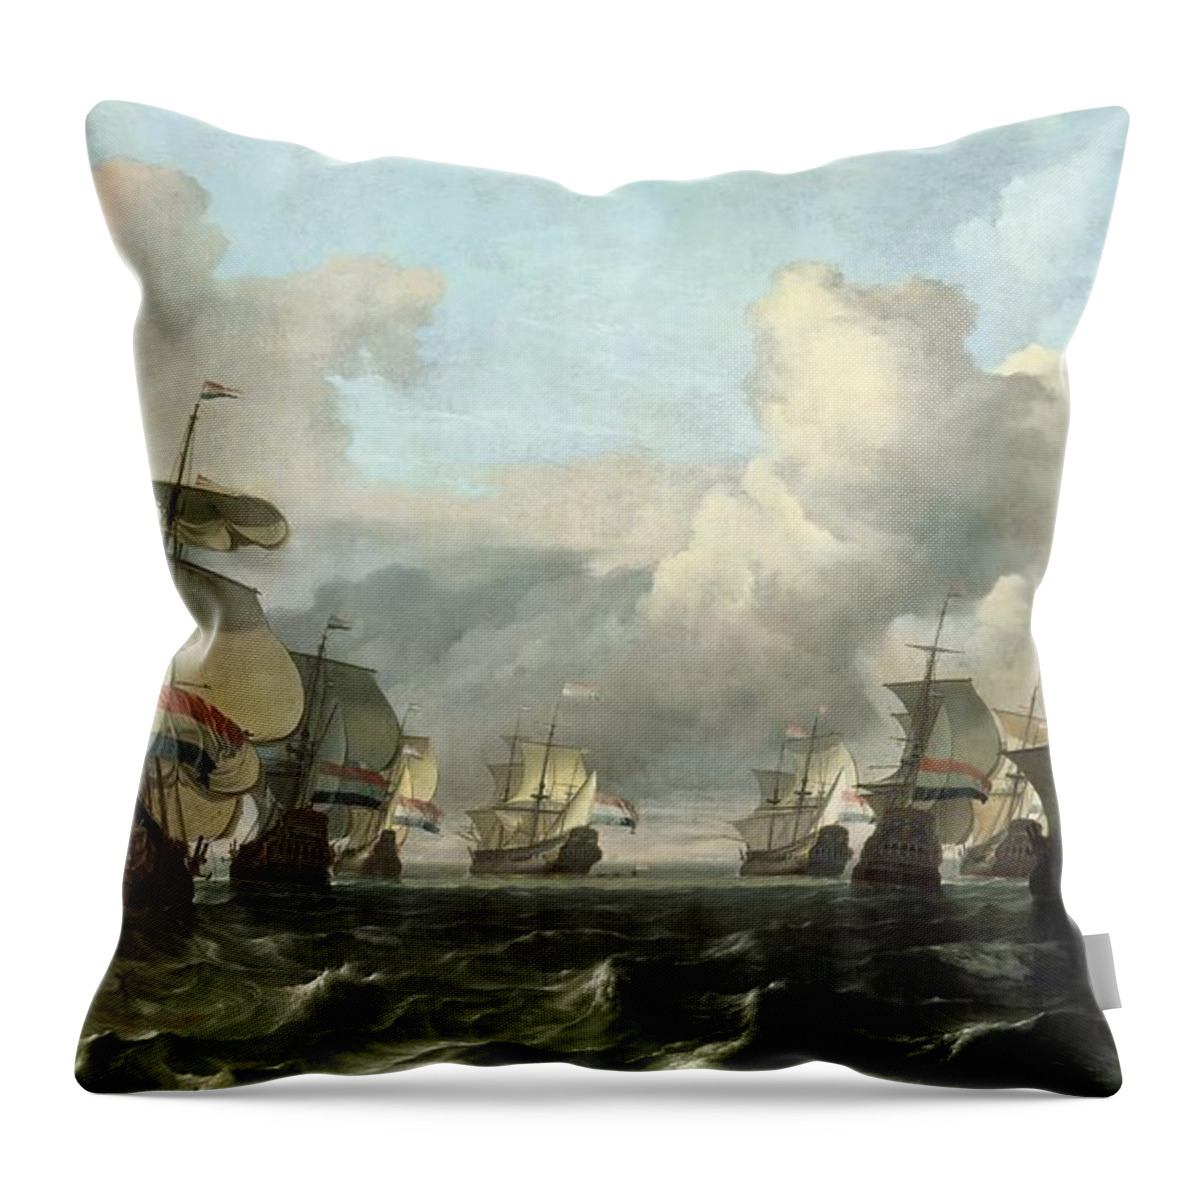 The Throw Pillow featuring the painting The Dutch Fleet of the India Company by Ludolf Backhuysen